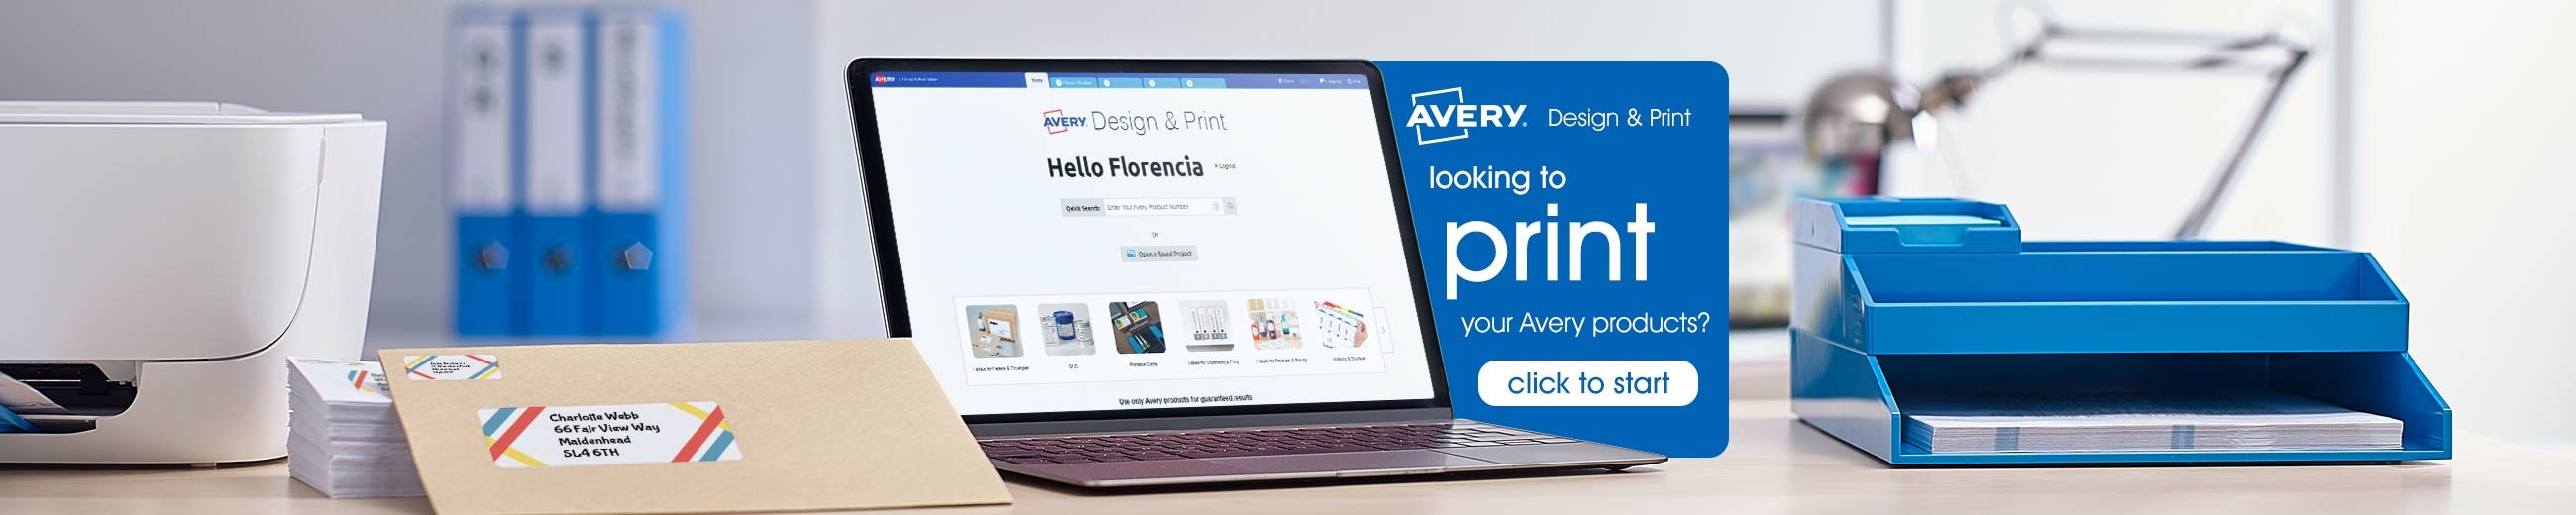 Avery Design and Print FREE Software